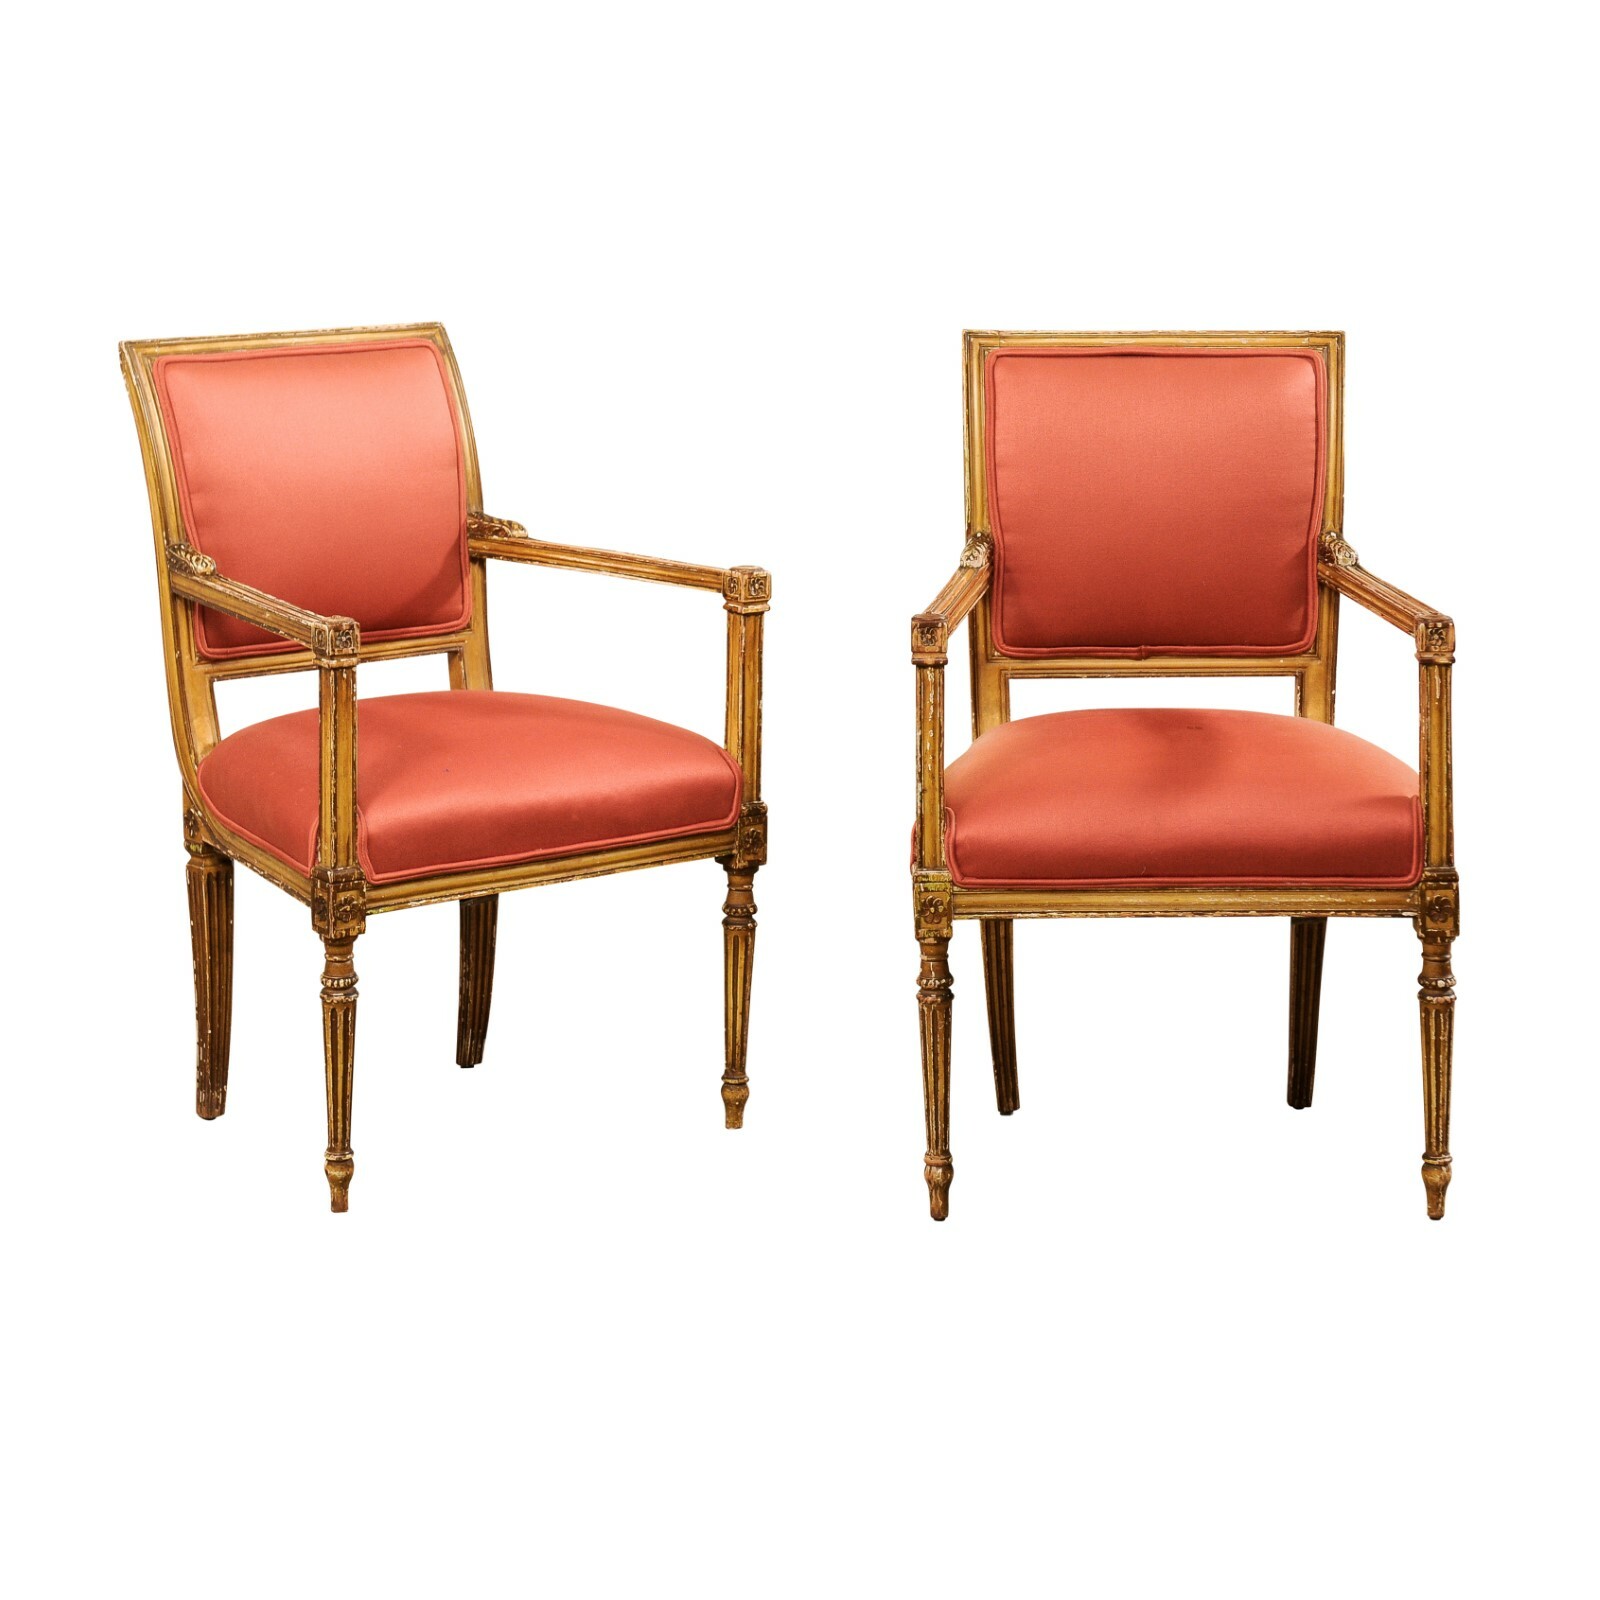 Antique Neoclassic Style Armchairs, Italy